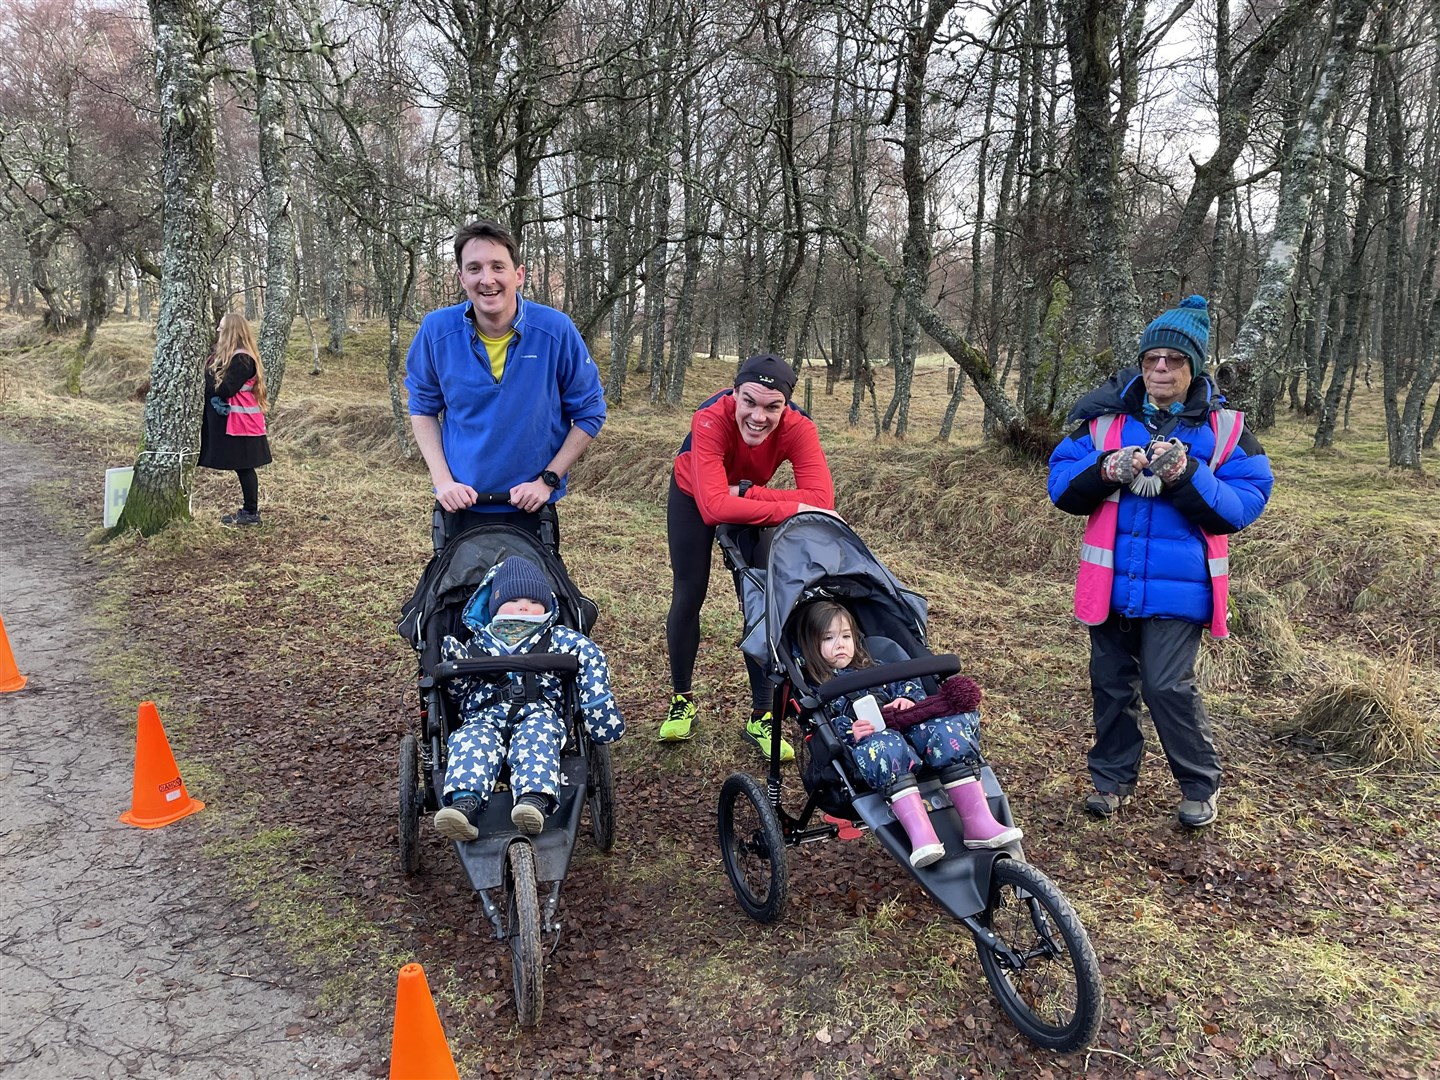 Battle of the buggies! Volunteer Val Machin with some happy participants this morning at the resumed ParkRun event.